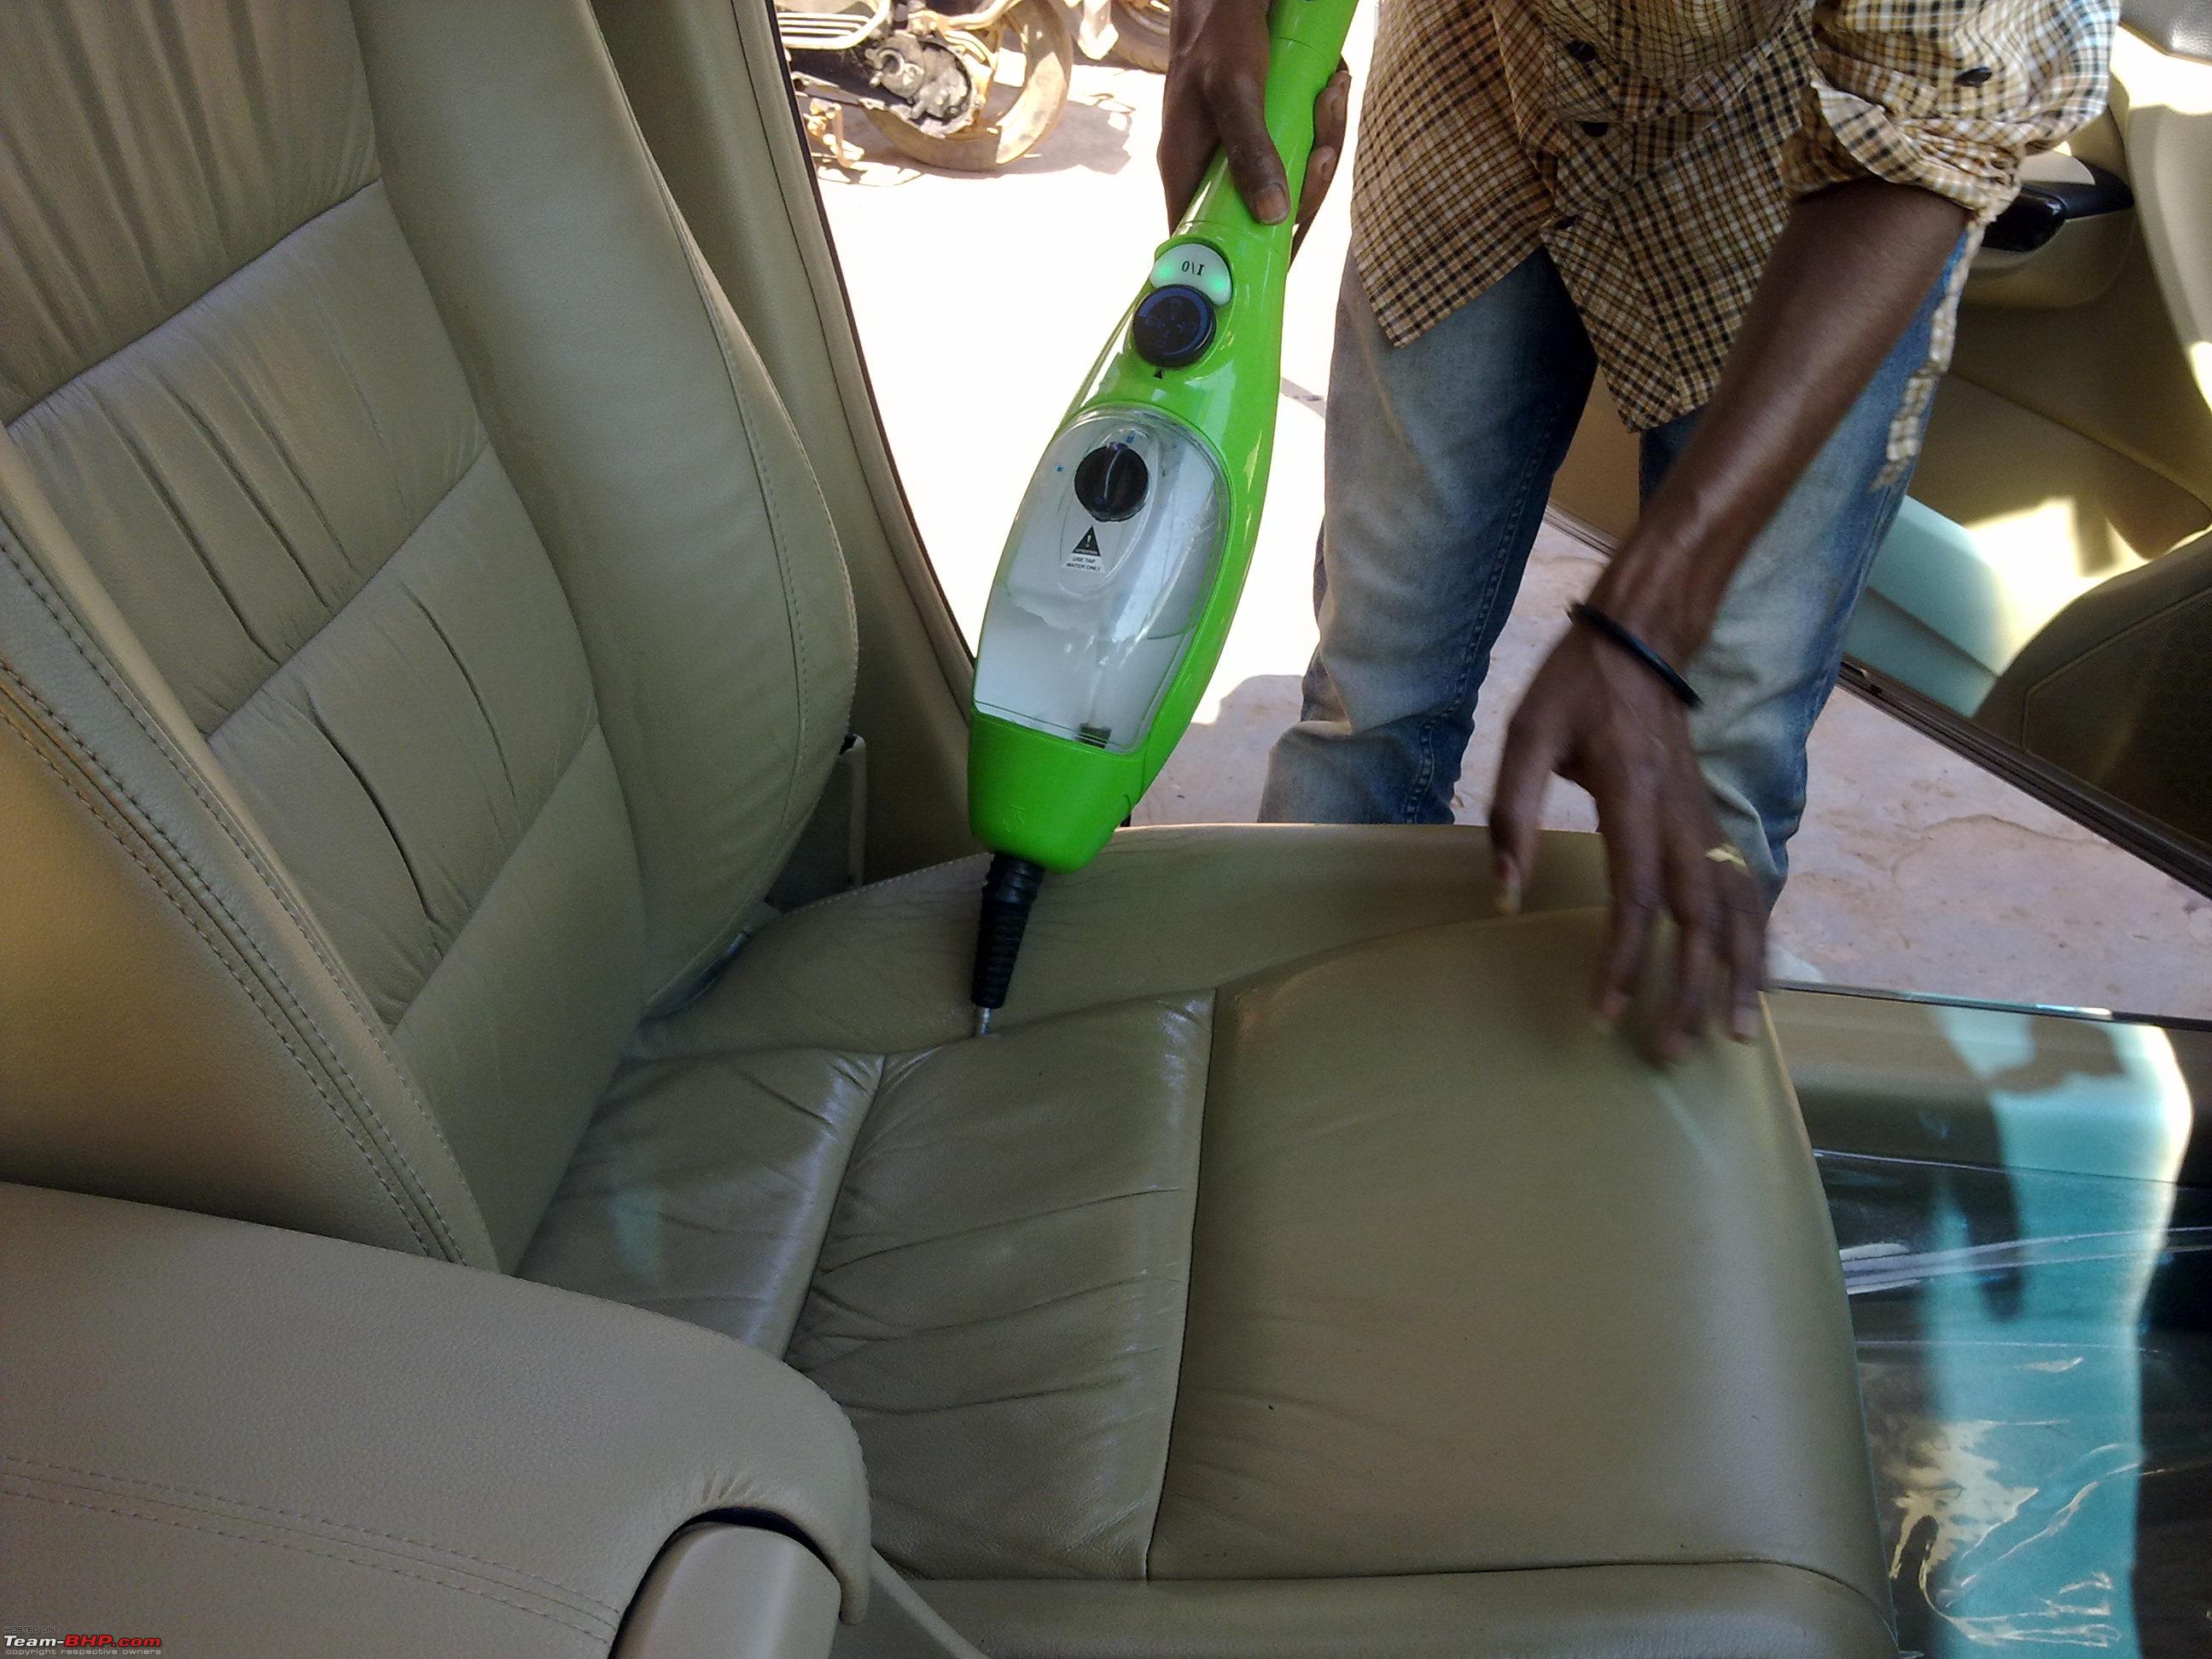 How do you clean car upholstery?